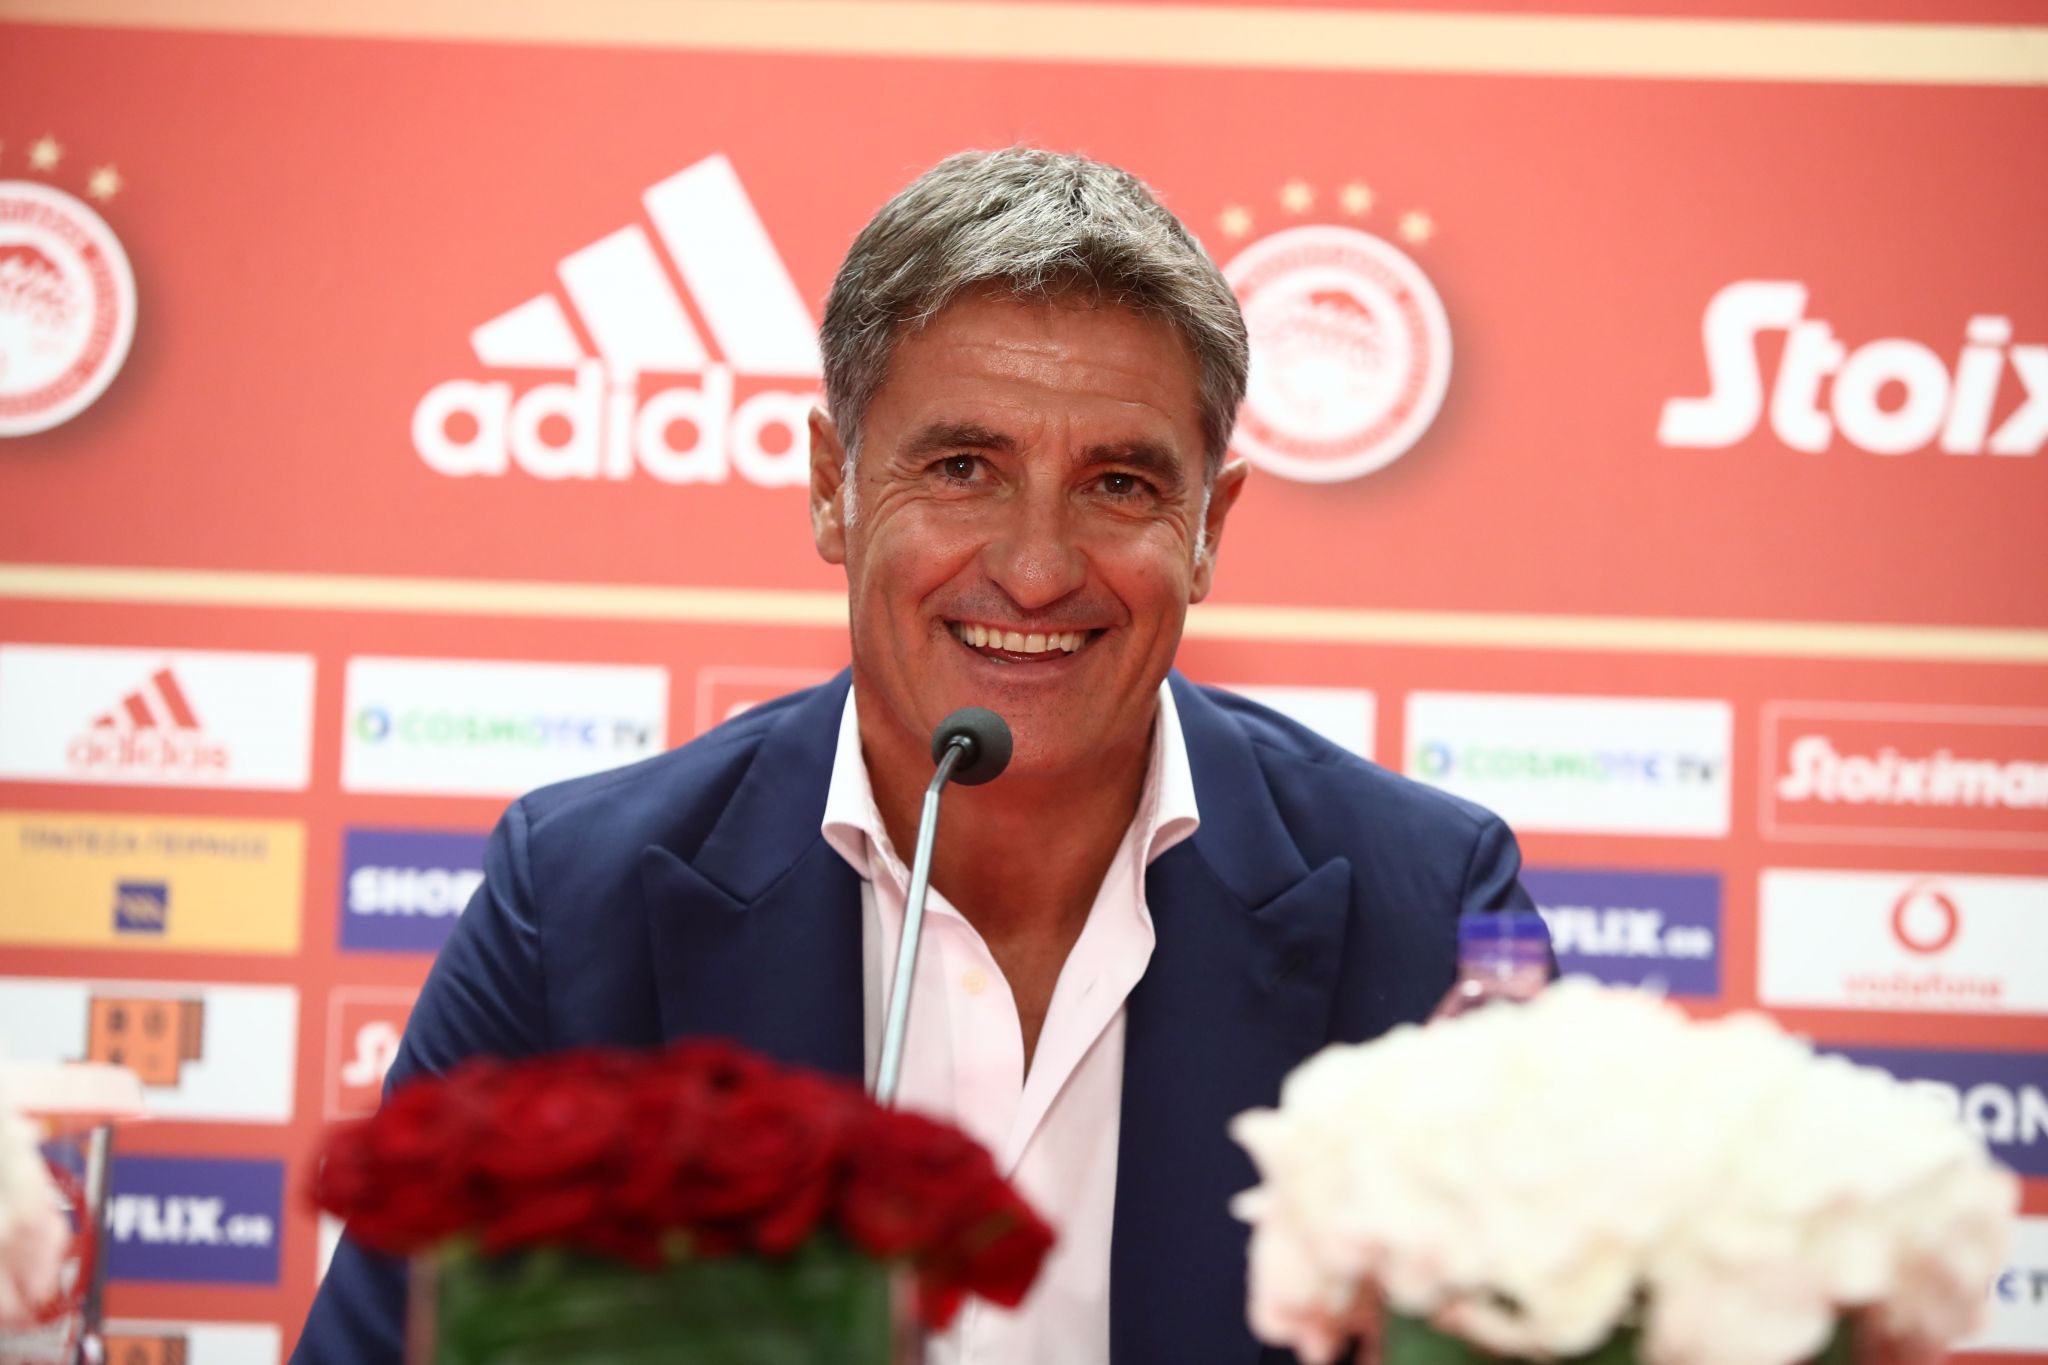 Míchel: “My soul is truly joyful, we will be even better than the first time”